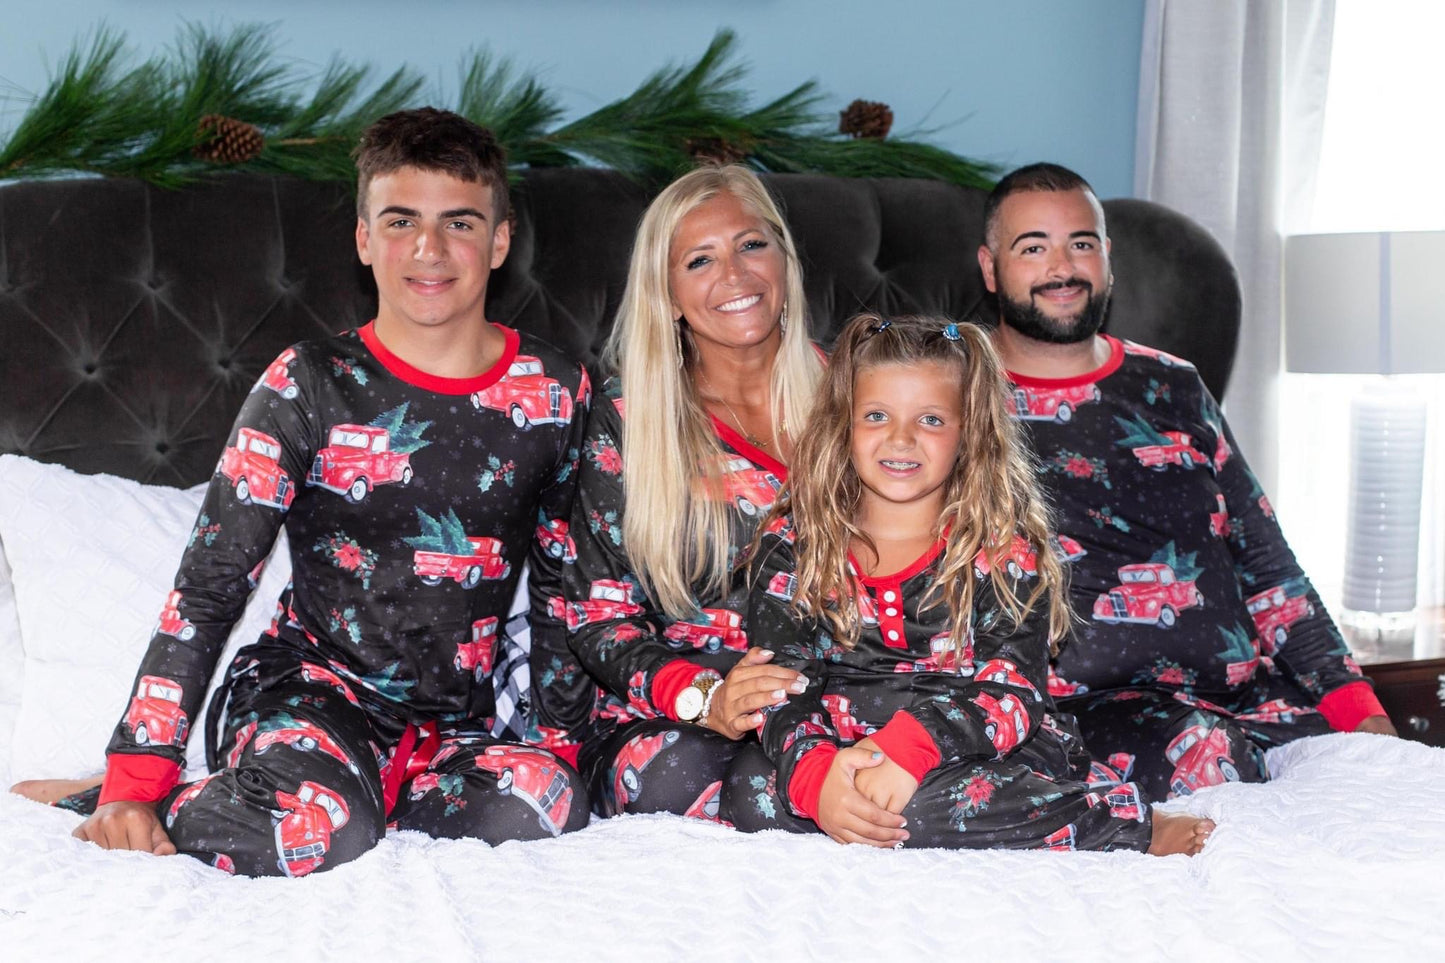 Preorder Christmas PJs Childs